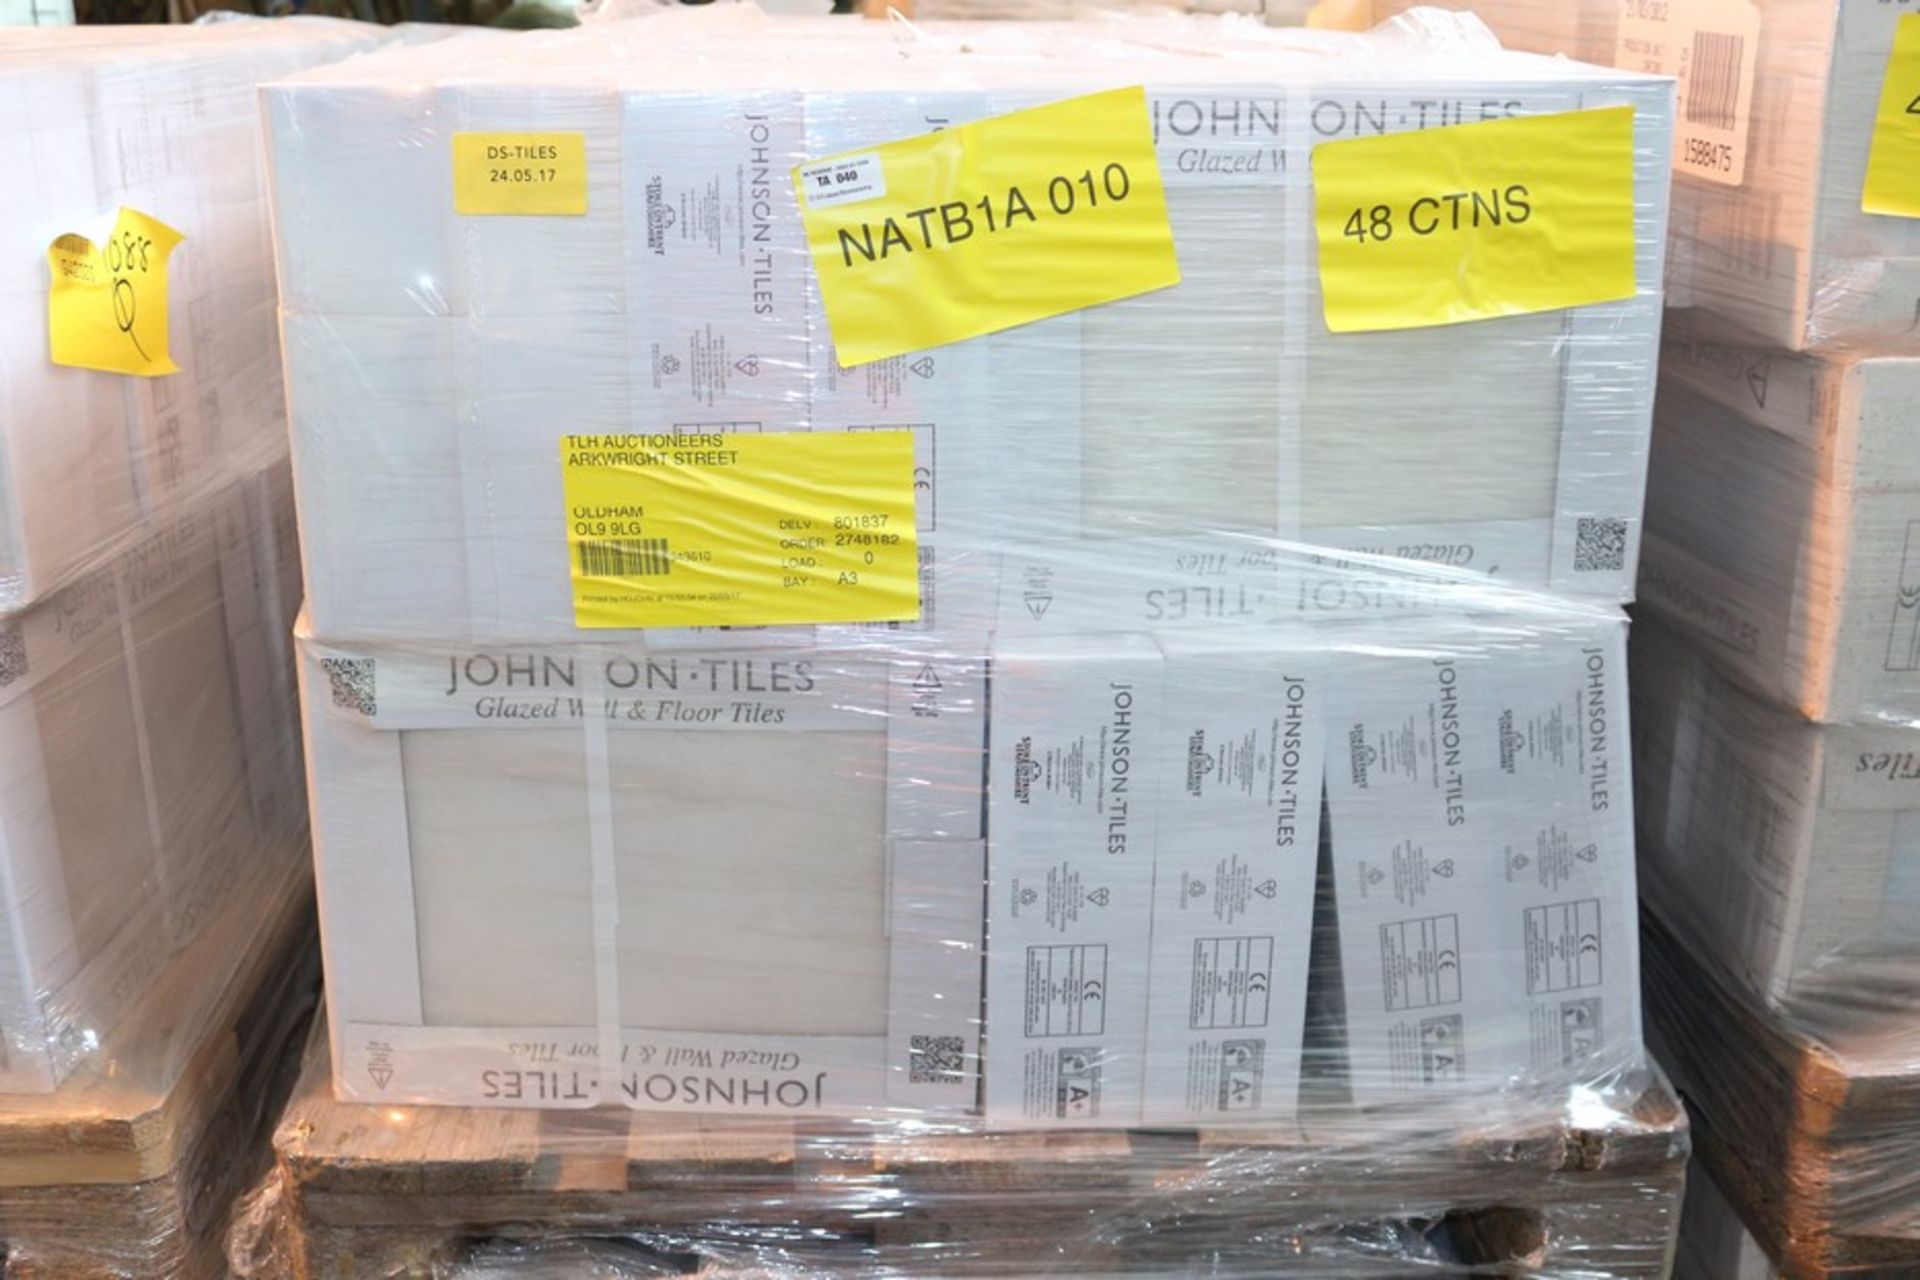 48X FACTORY SEALED BY JOHNSON TILES GLAZED WALL AND FLOOR TILES 360 X 270MM RRP £19.99 PER PACK - Image 3 of 3